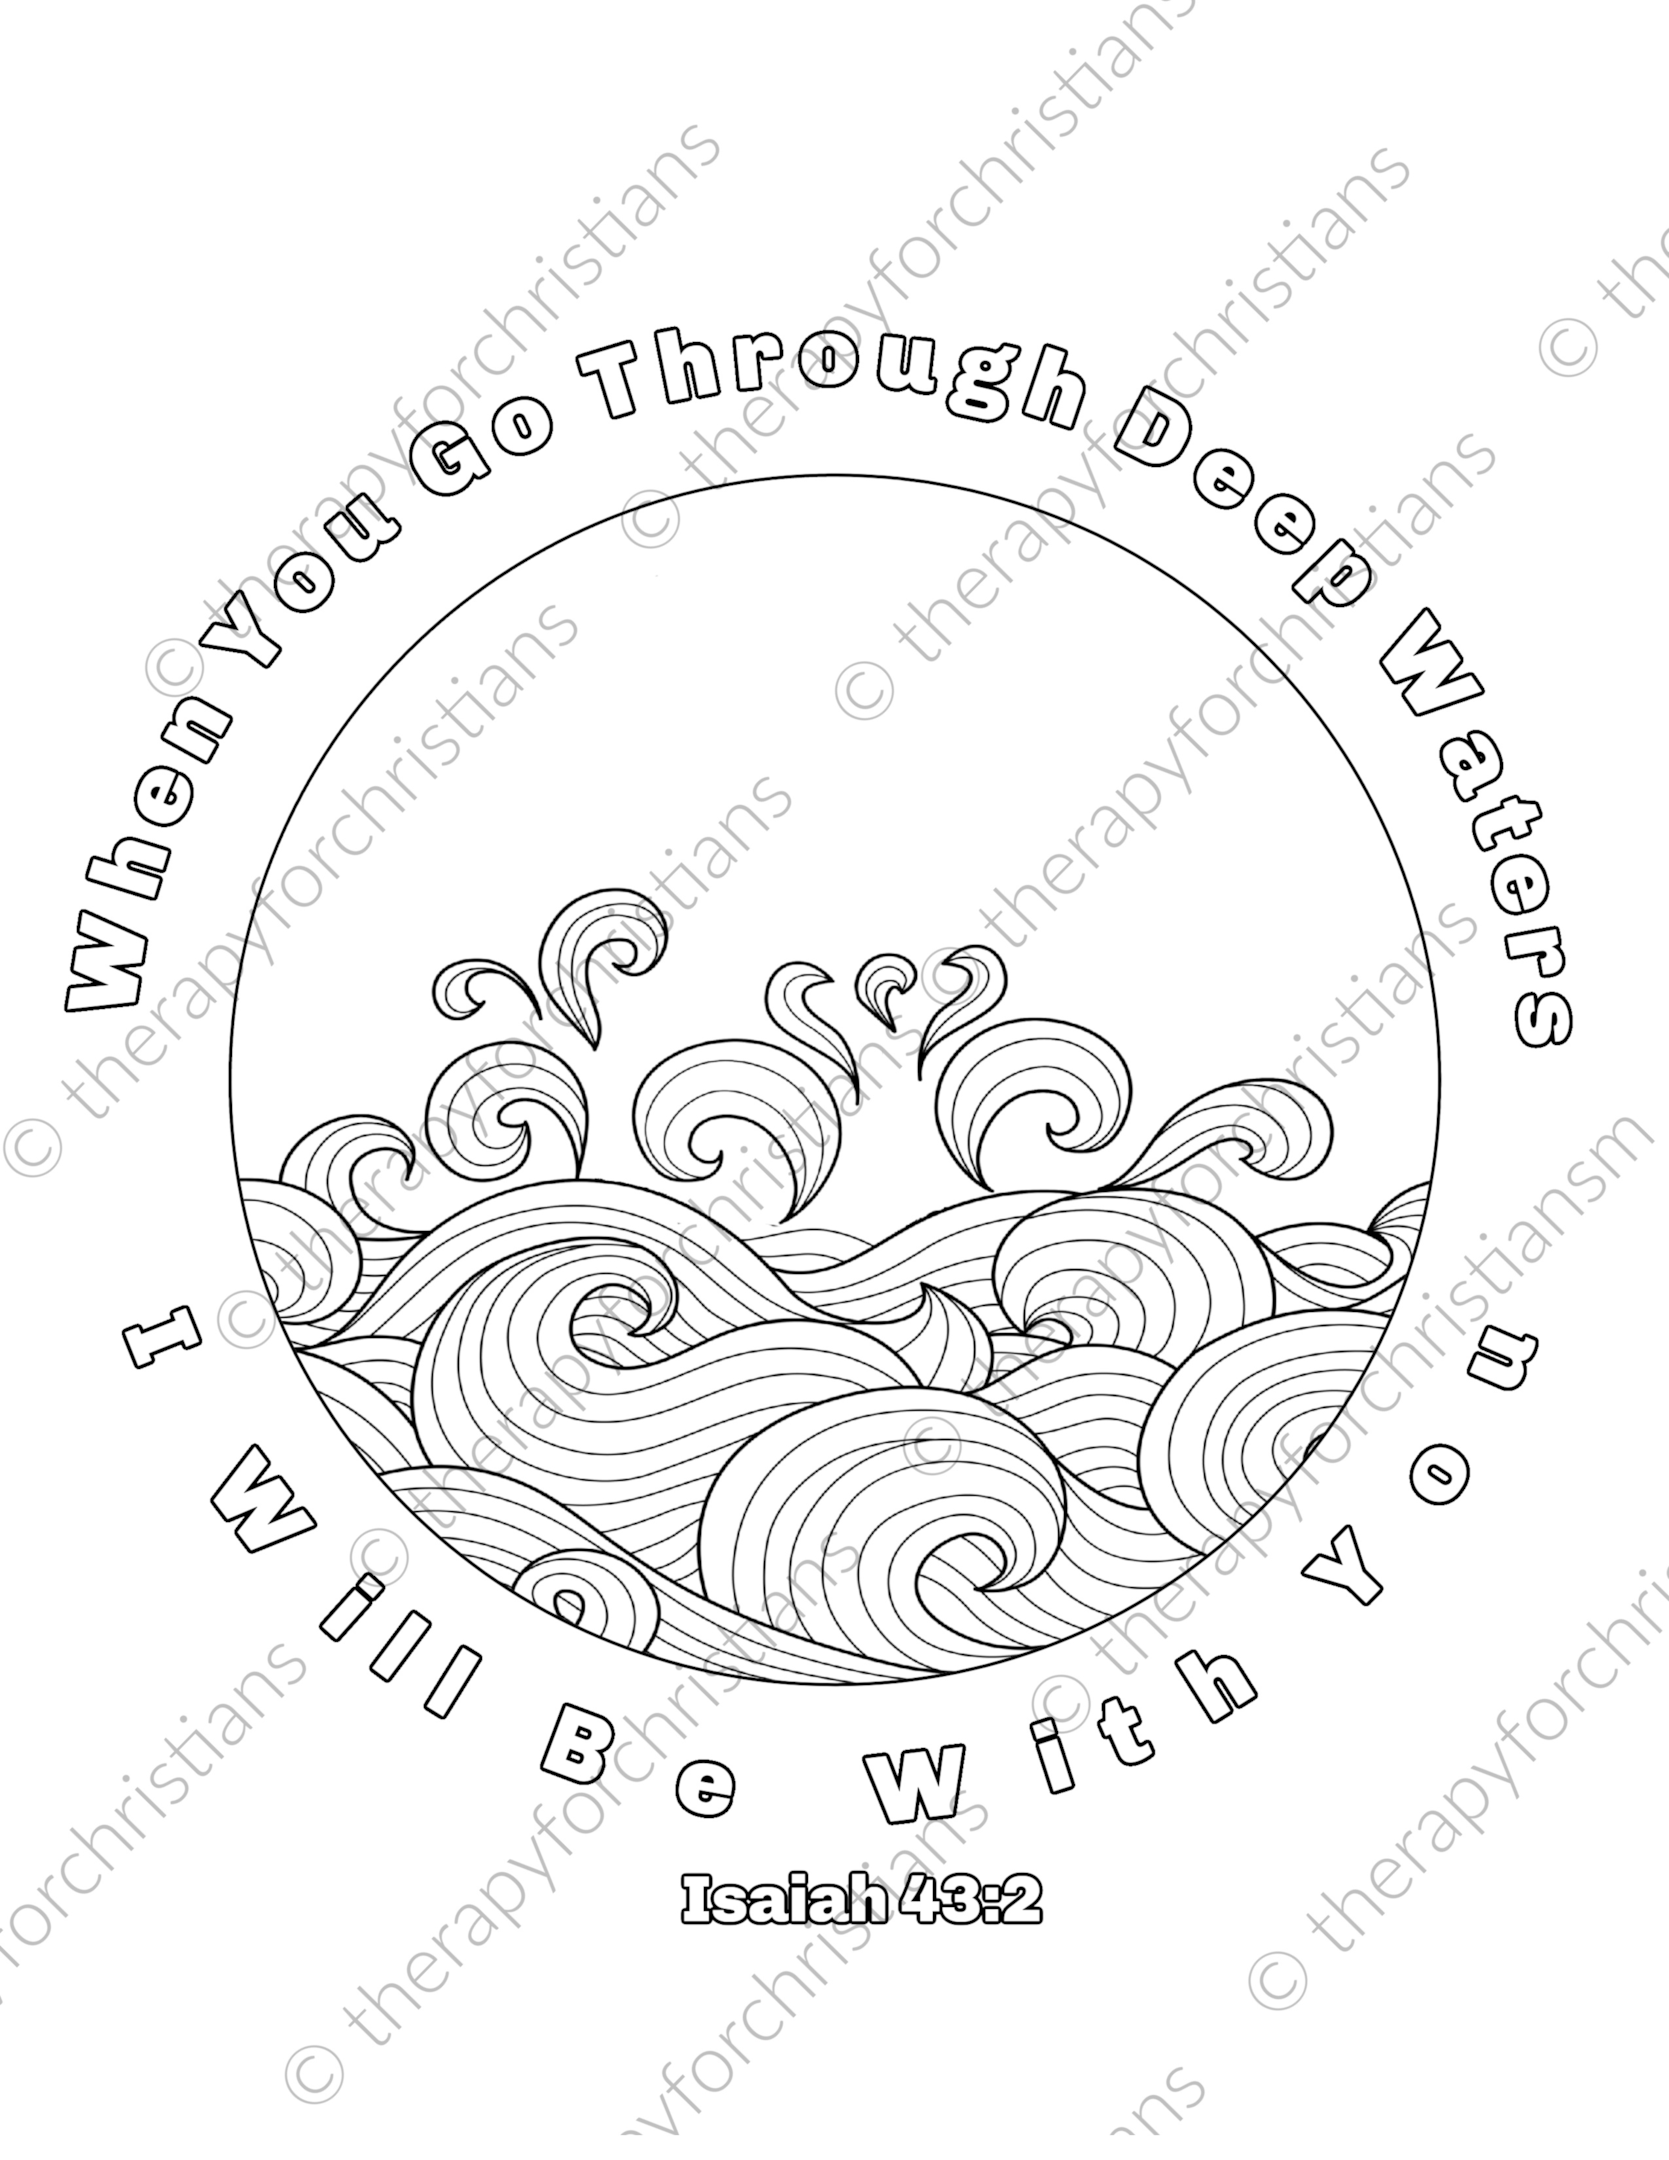 Isaiah 43:2 scripture coloring pages